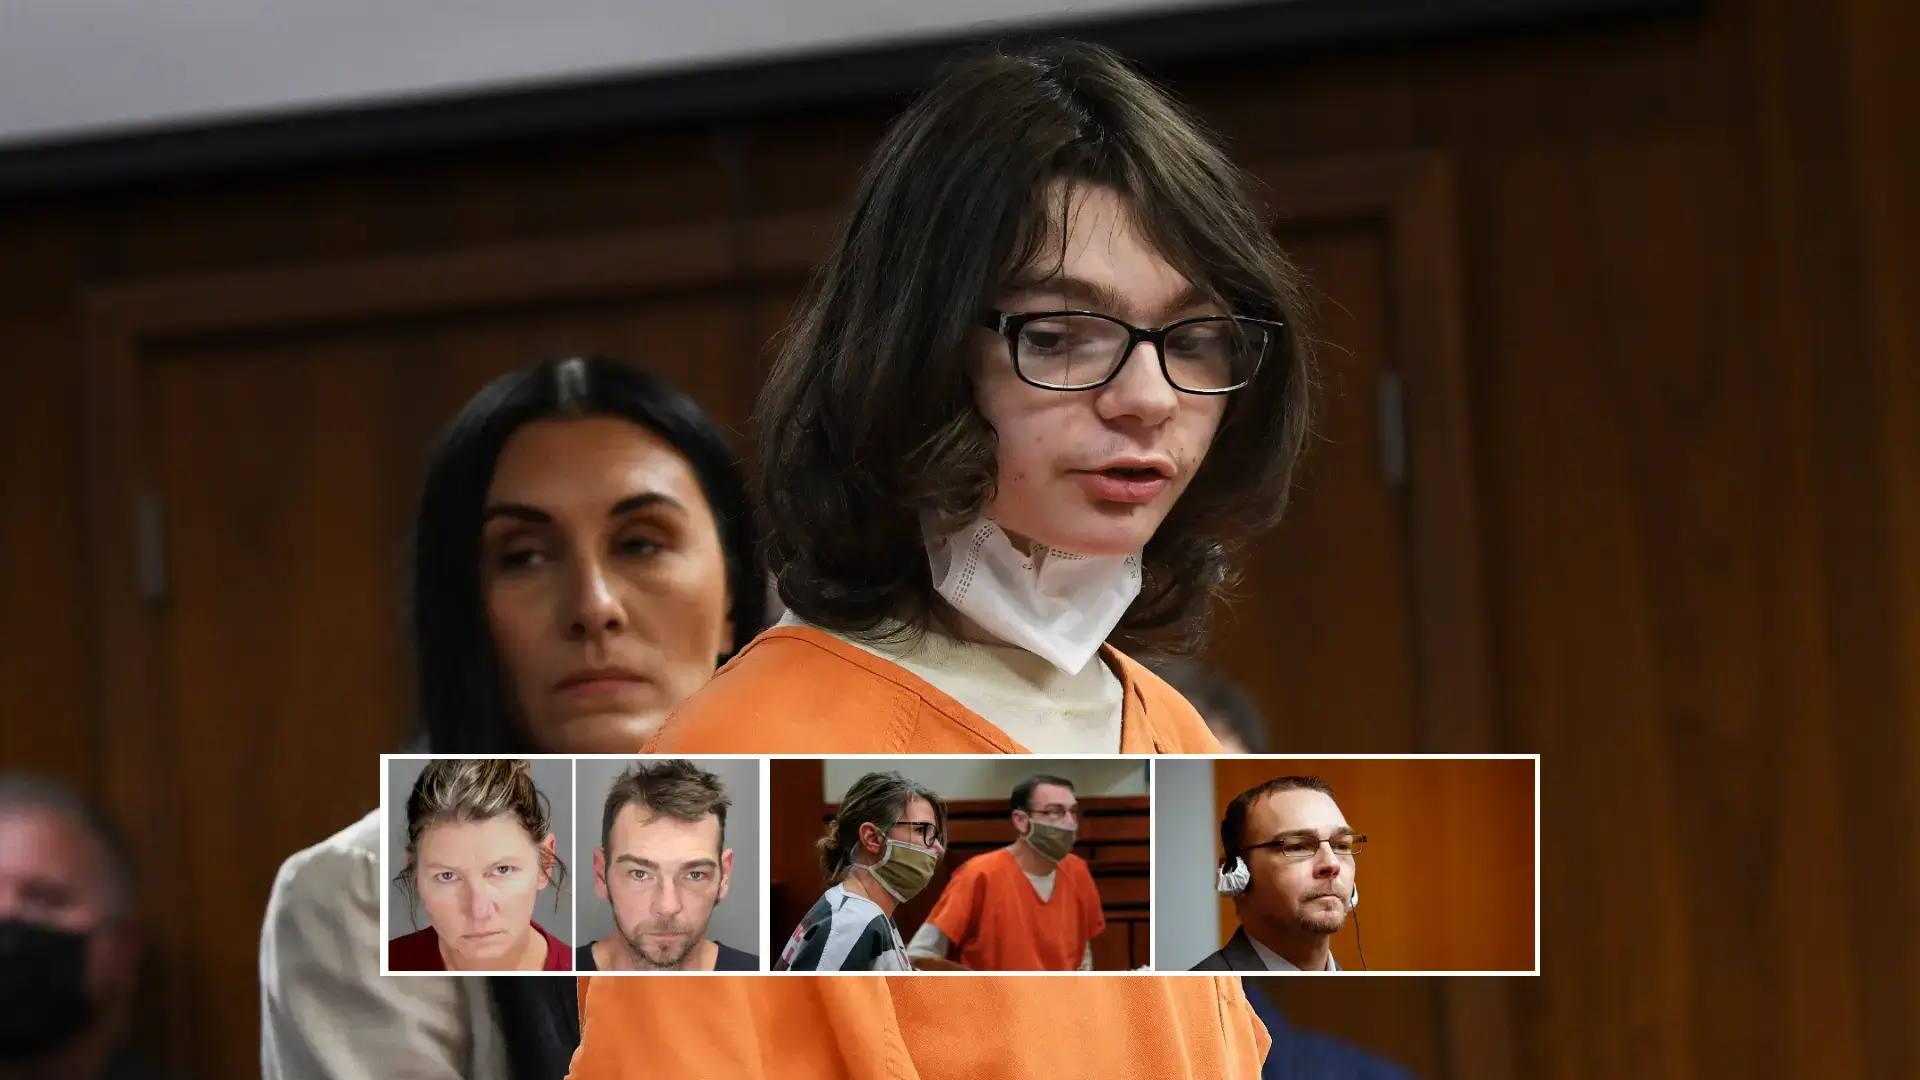 Parents Of Michigan School Shooter Ethan Crumbly To Be Sentenced In Rare Us Case